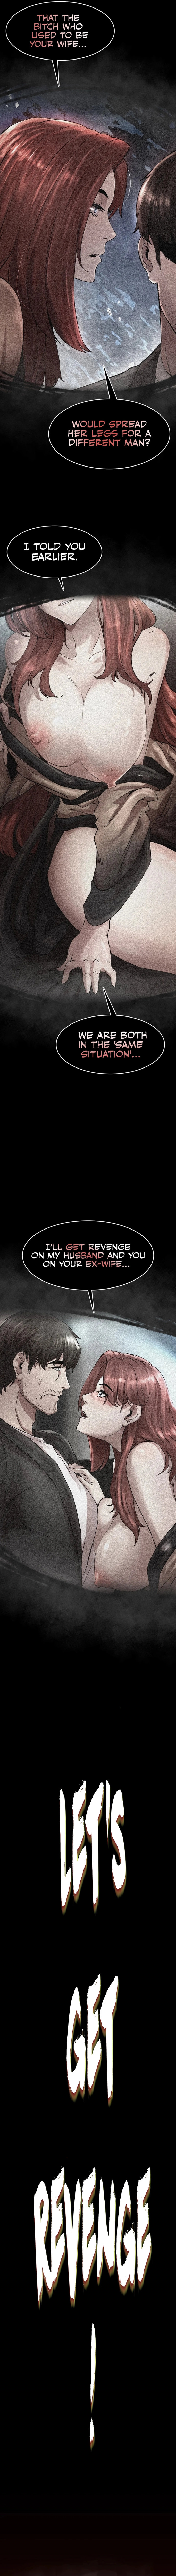 Revenge - Chapter 2 Page 28